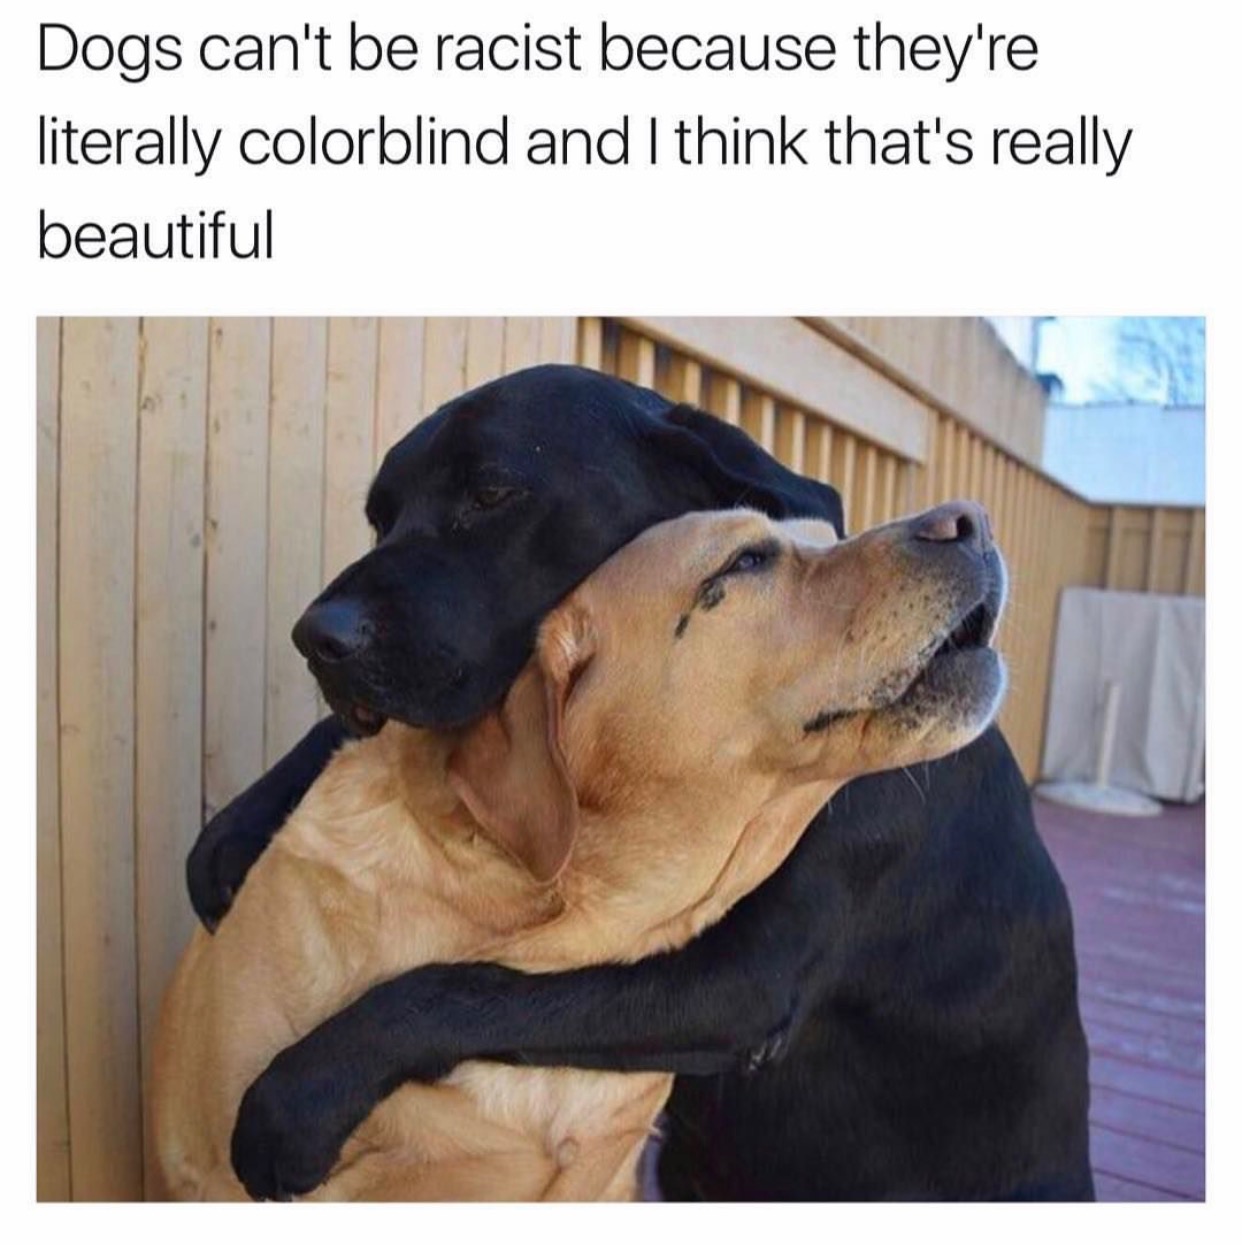 memes - need a hug meme - Dogs can't be racist because they're literally colorblind and I think that's really beautiful